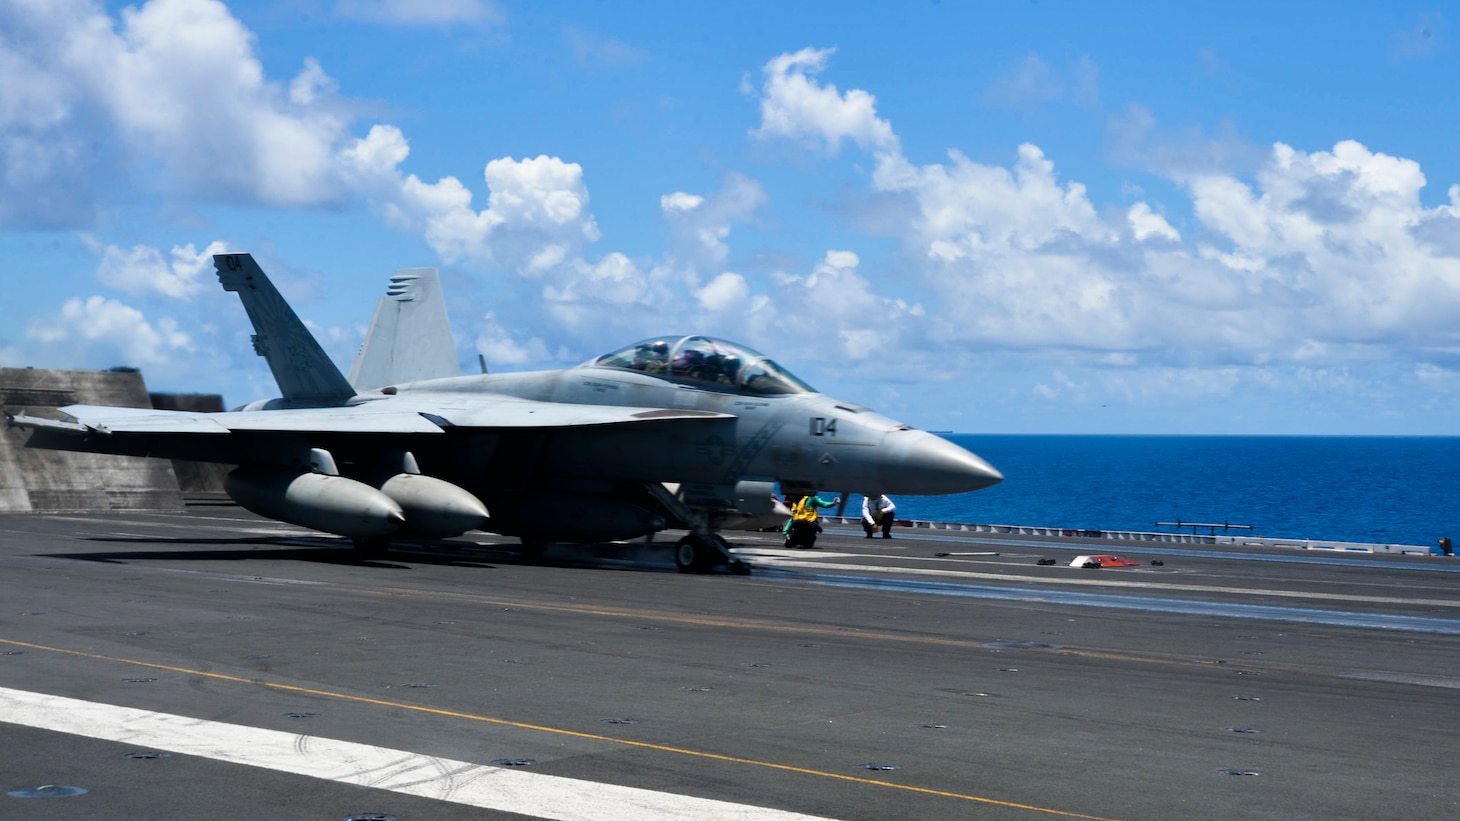 200814-N- KP021-0206 SOUTH CHINA SEA (August 14, 2020) An F/A-18F assigned to the “Diamondbacks” of Strike Fighter Squadron (VFA) 102 launches off the flight deck of America’s only forward-deployed aircraft carrier USS Ronald Reagan (CVN 76)  while conducting operations in the South China Sea. Ronald Reagan, the flagship of Carrier Strike Group 5, provides a combat-ready force that protects and defends the United States, as well the collective maritime interests of its allies and partners in the Indo-Pacific region. (U.S. Navy photo by Mass Communication Specialist 2nd Class Codie L. Soule)